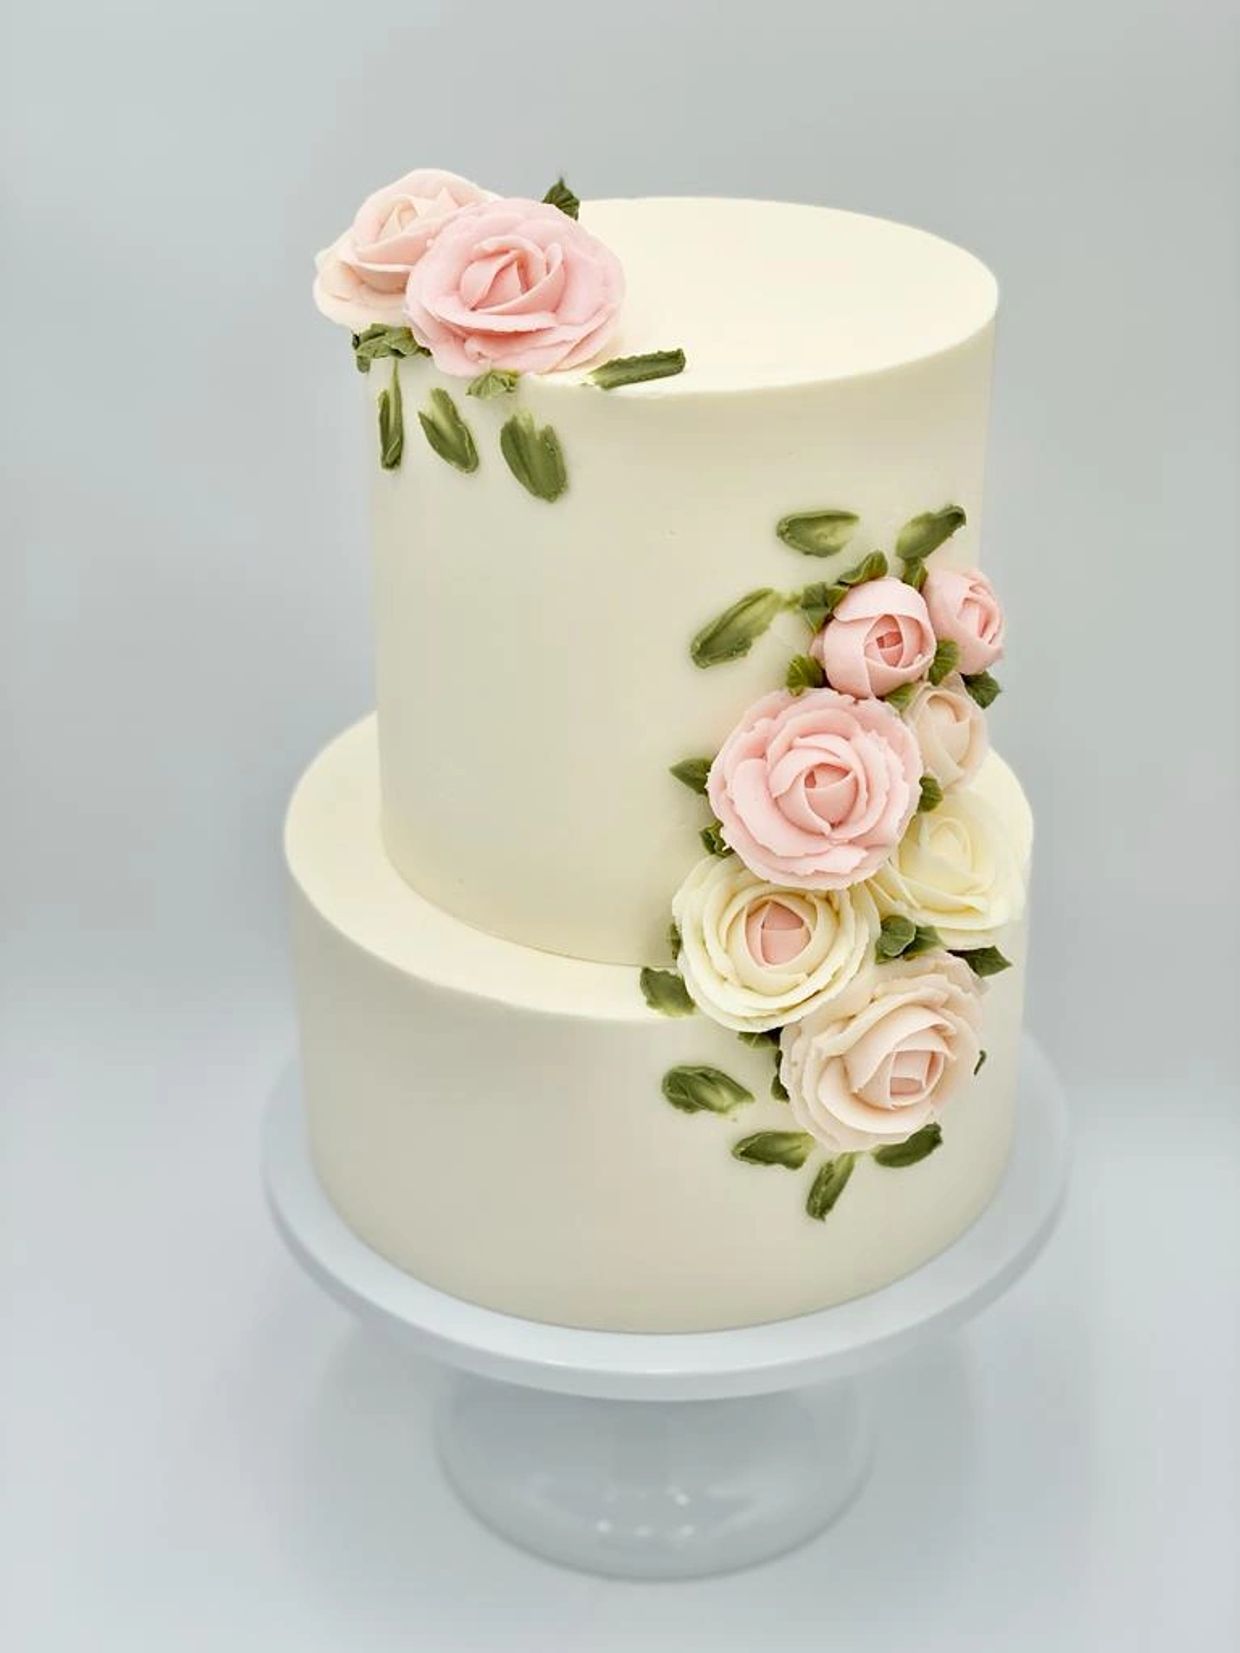 Simple clean and modern wedding cake with buttercream roses